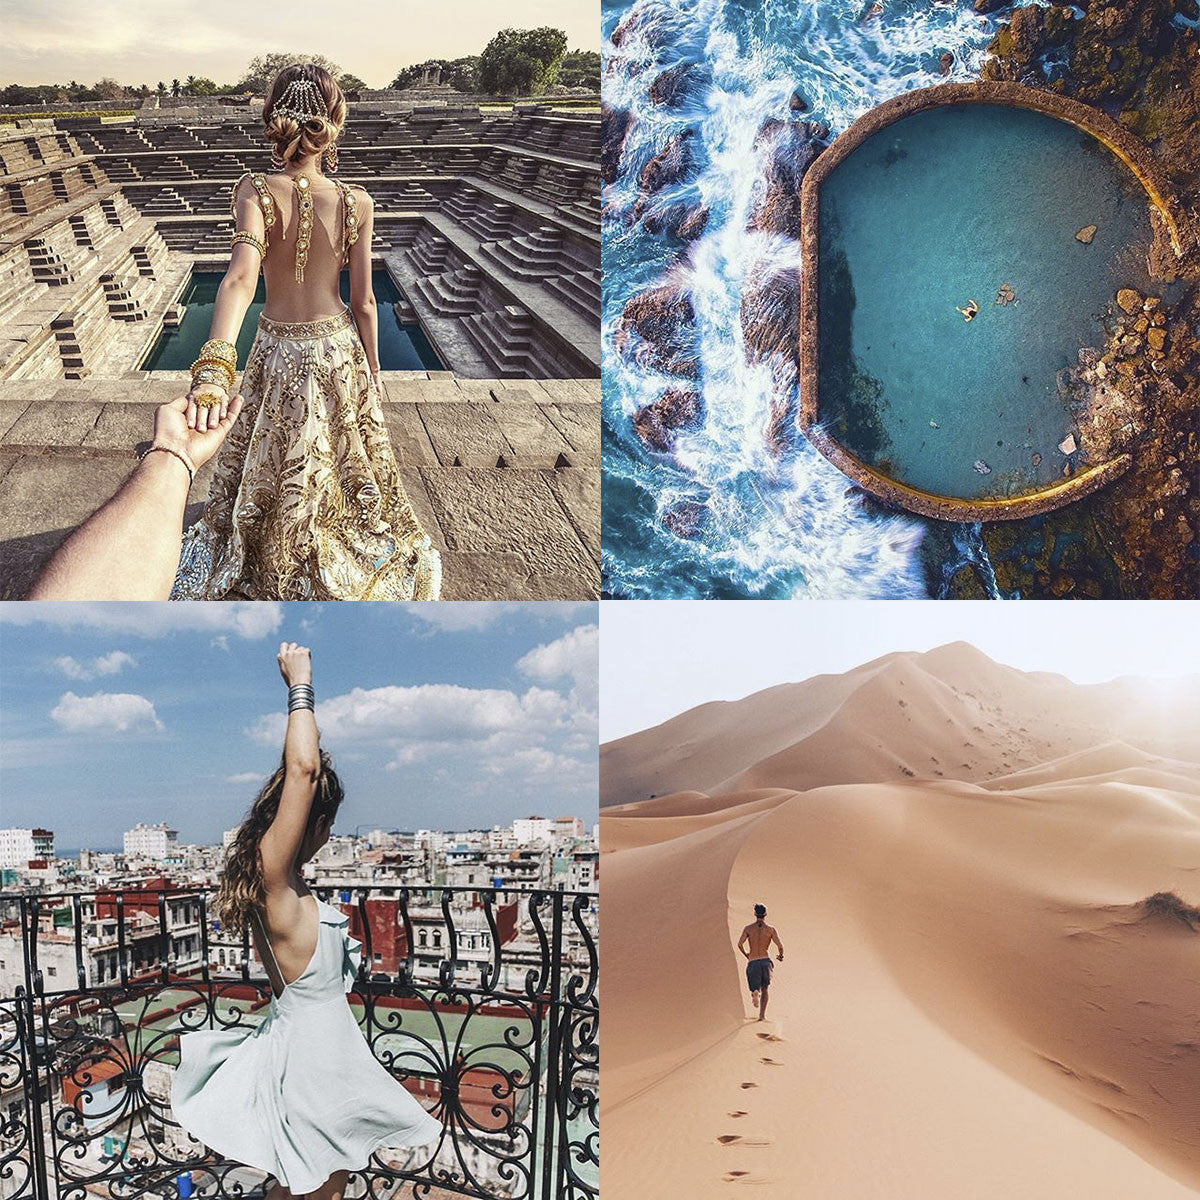 5 Instagram Travel Photographers To Get You Daydreaming